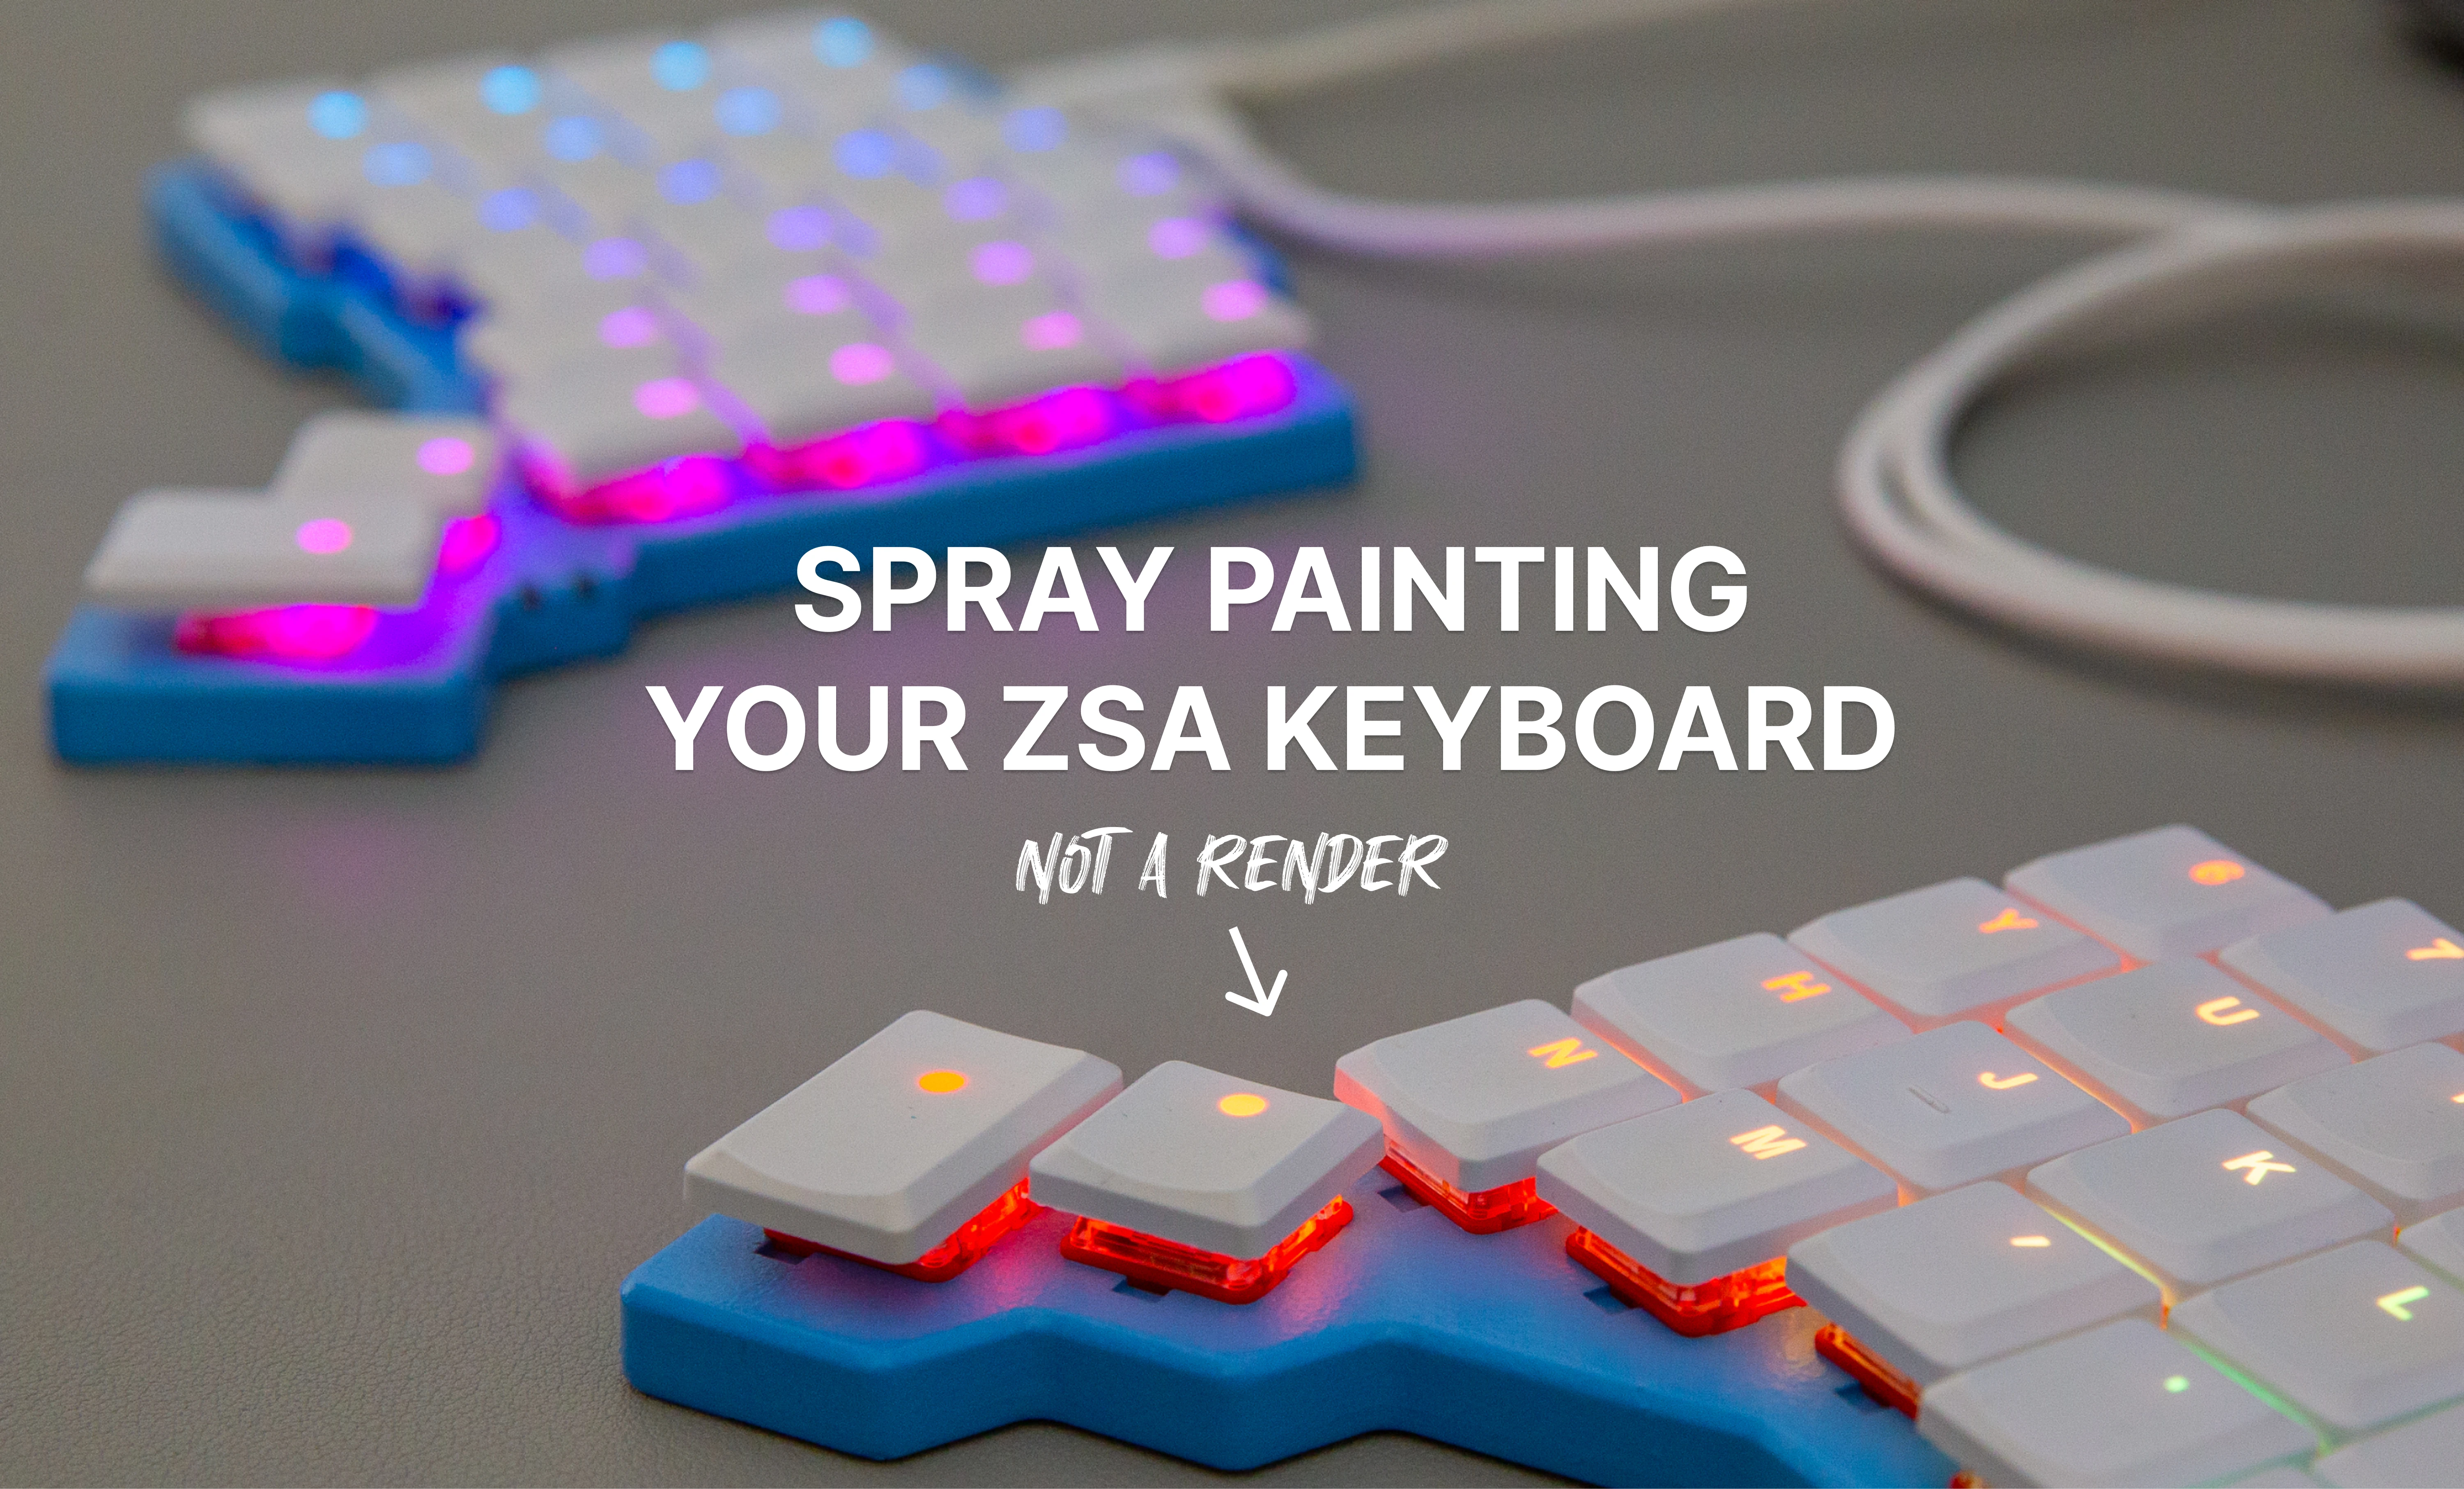 How to Spray Paint Your Keyboard